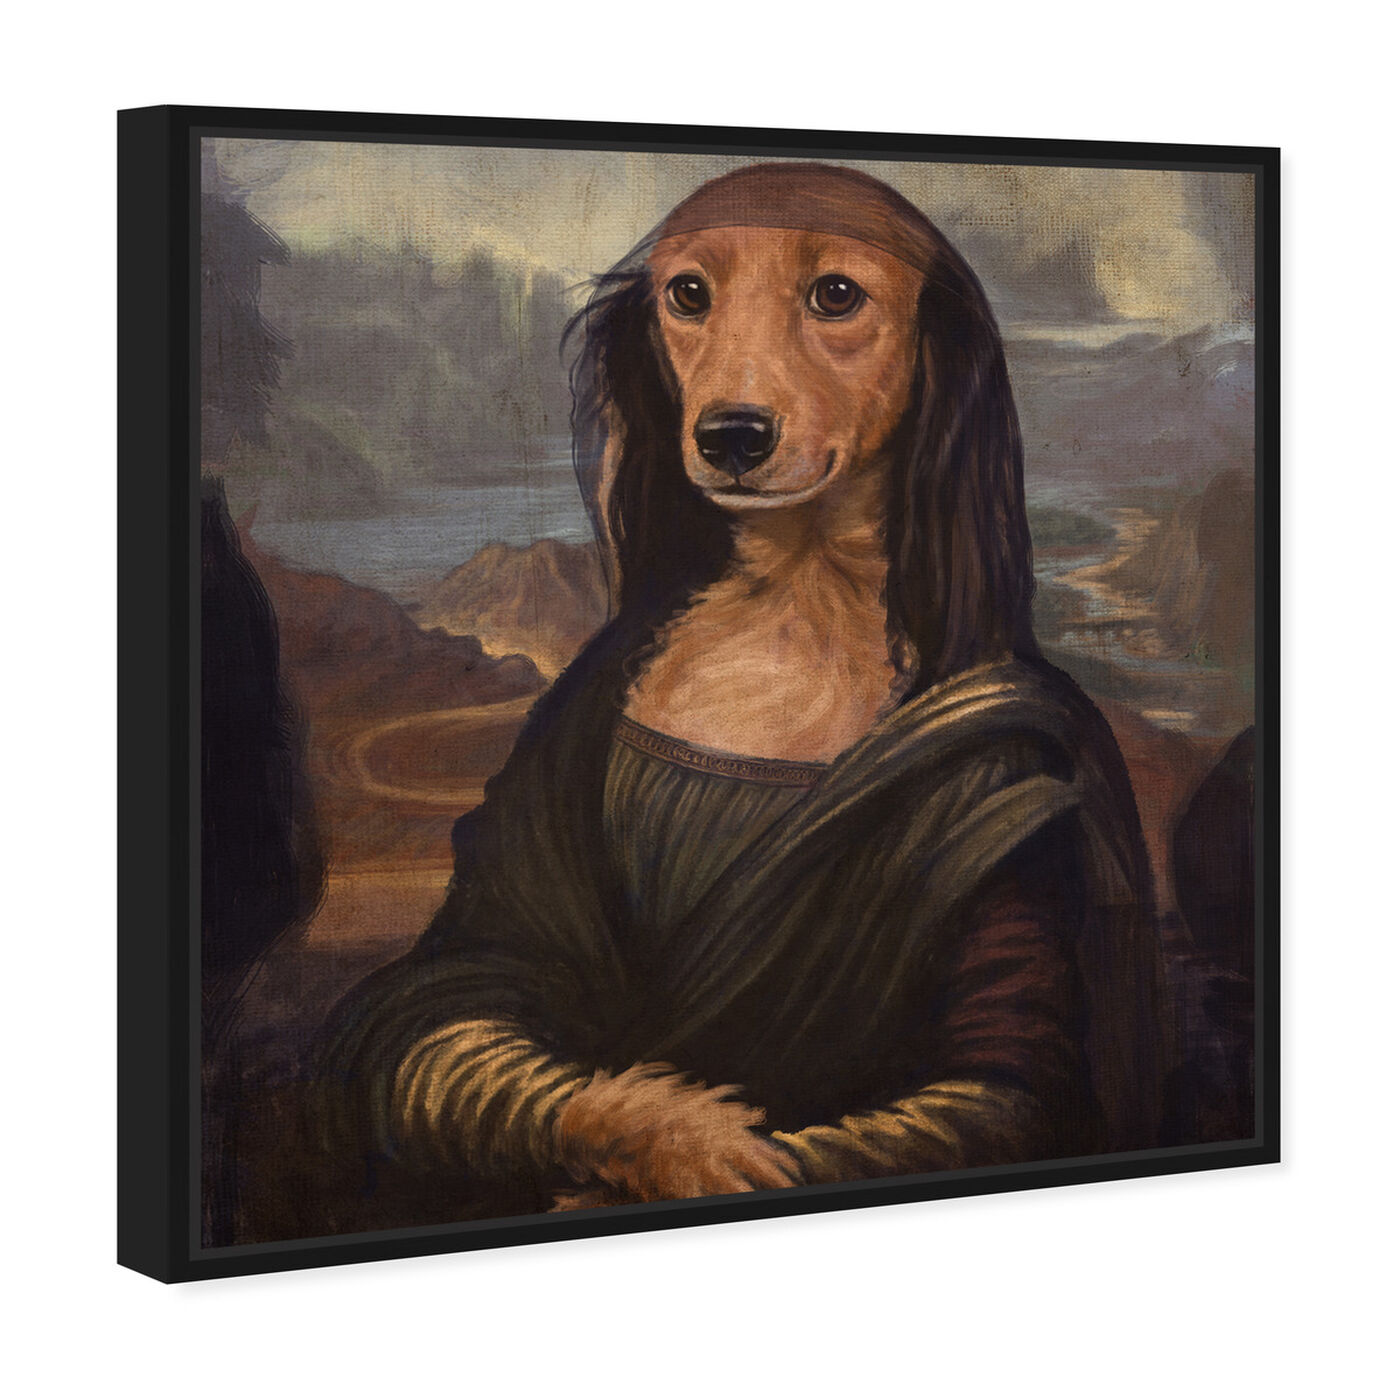 Angled view of Mona Lisa Pet featuring animals and dogs and puppies art.